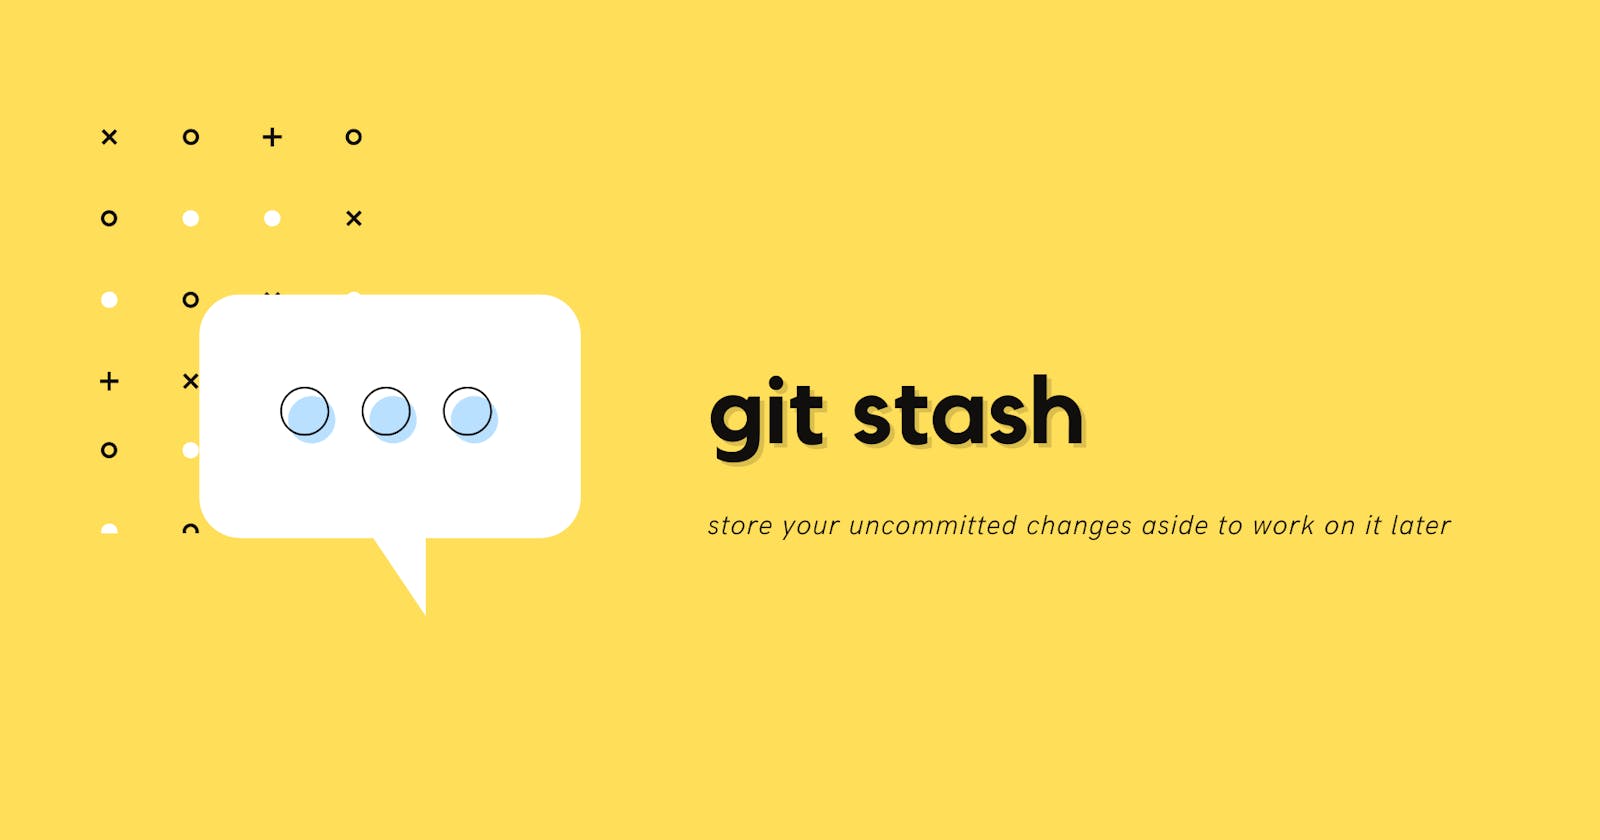 git stash - Store your uncommitted changes aside to work on it later